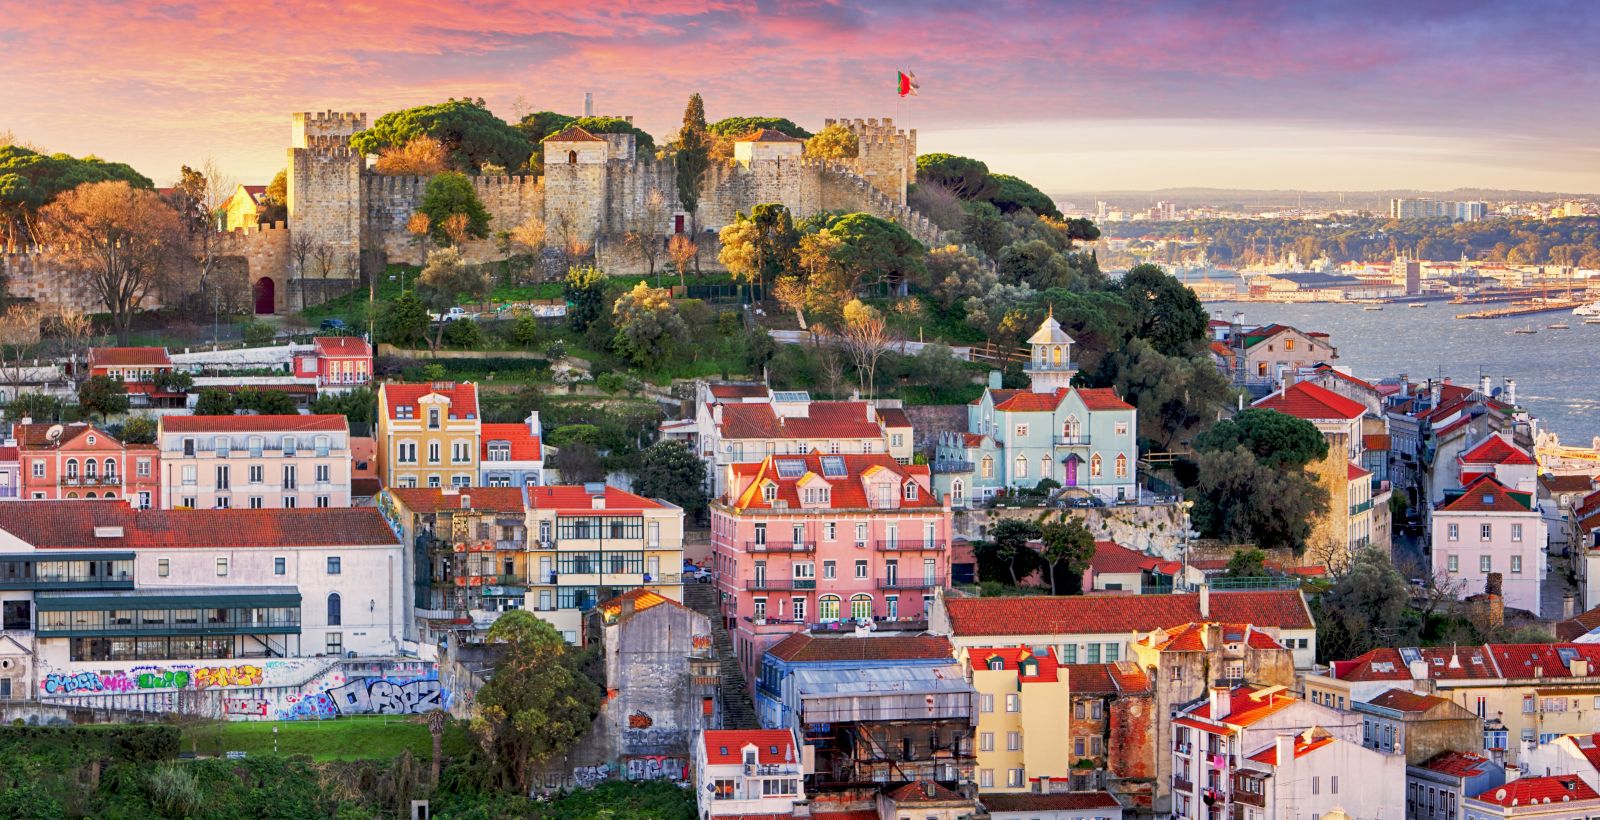 São Jorge castle and surrounding buildings of the old Lisbon.